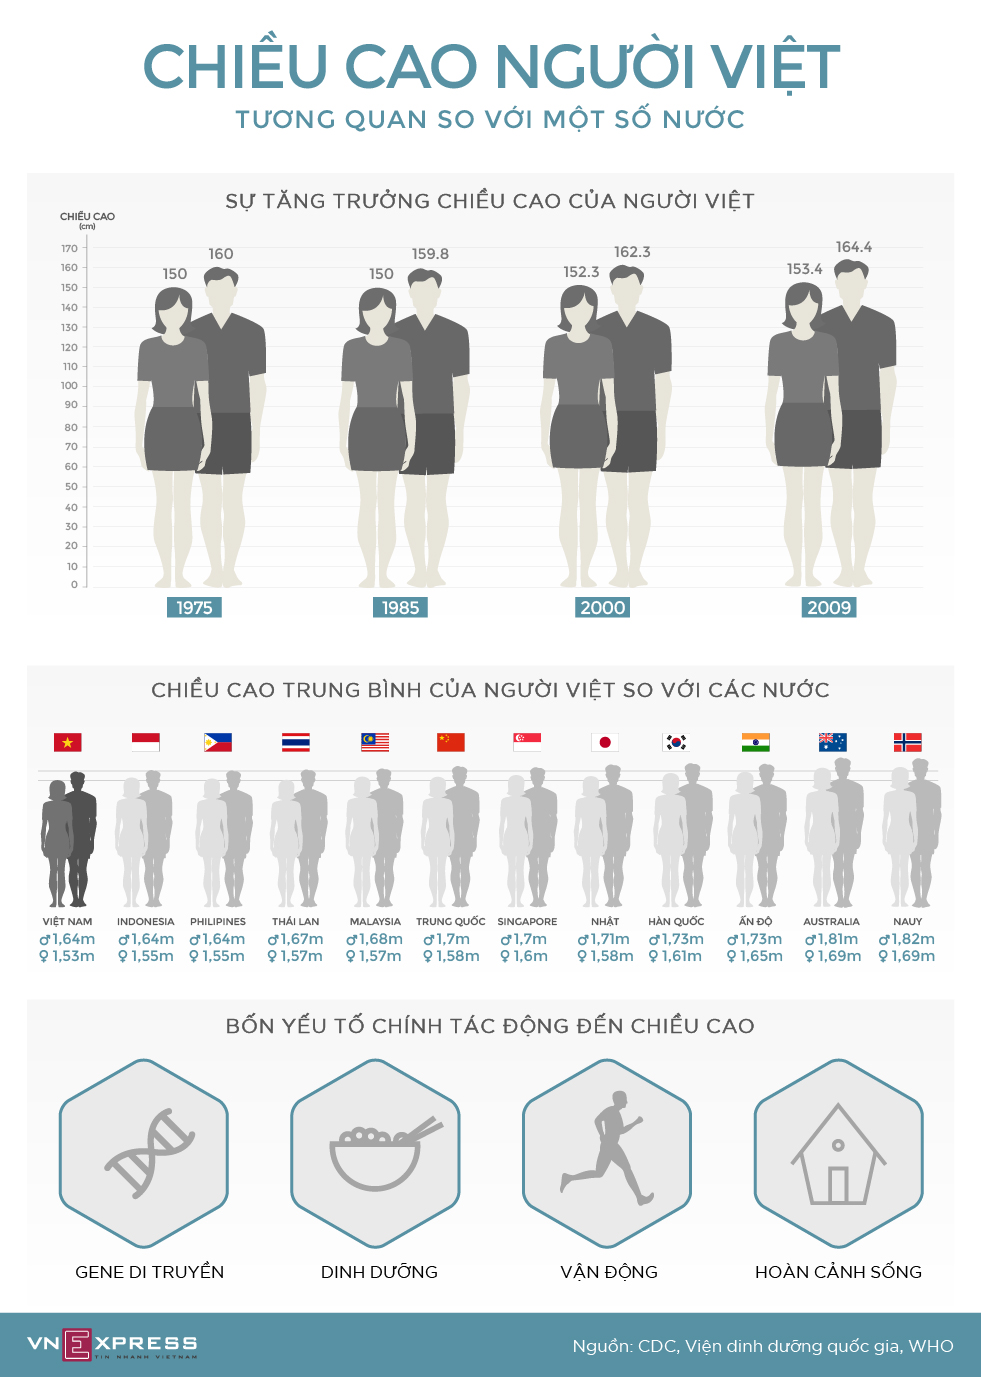 Vietnamese's average height increases insignificantly after a decade, Health